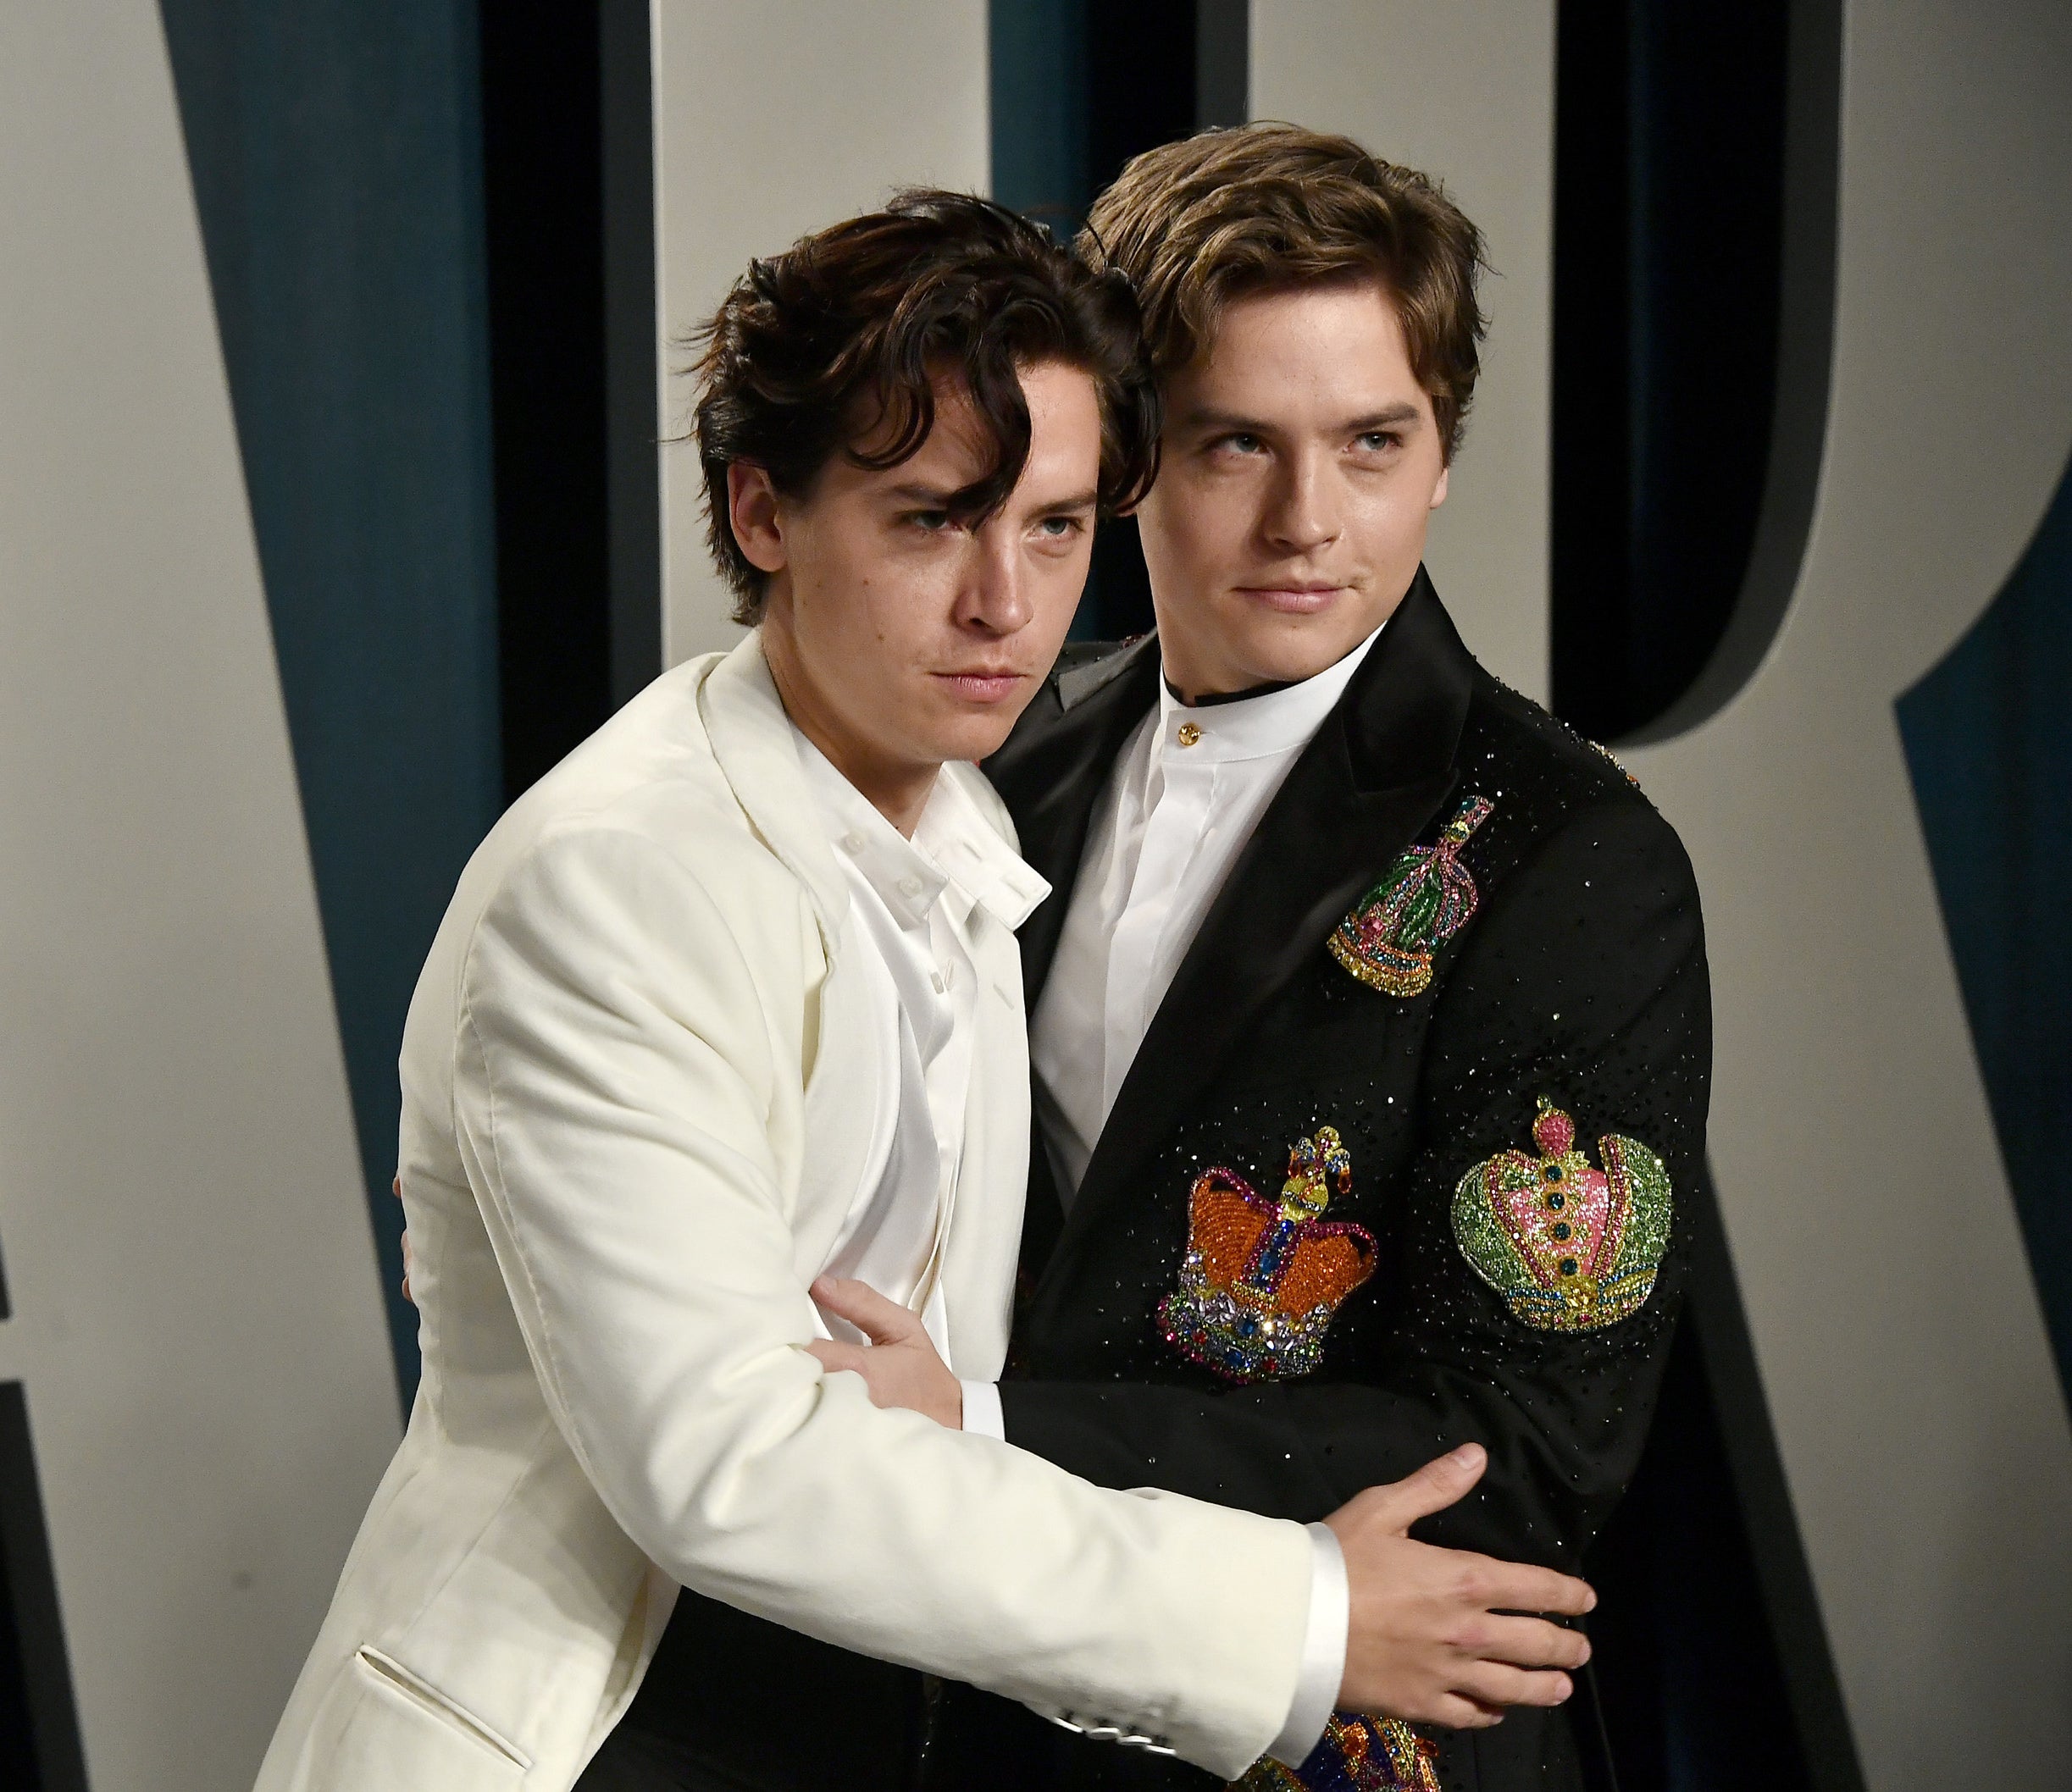 Cole Sprouse and Dylan Sprouse are pictured at the 2020 Vanity Fair Oscar Party on February 09, 2020